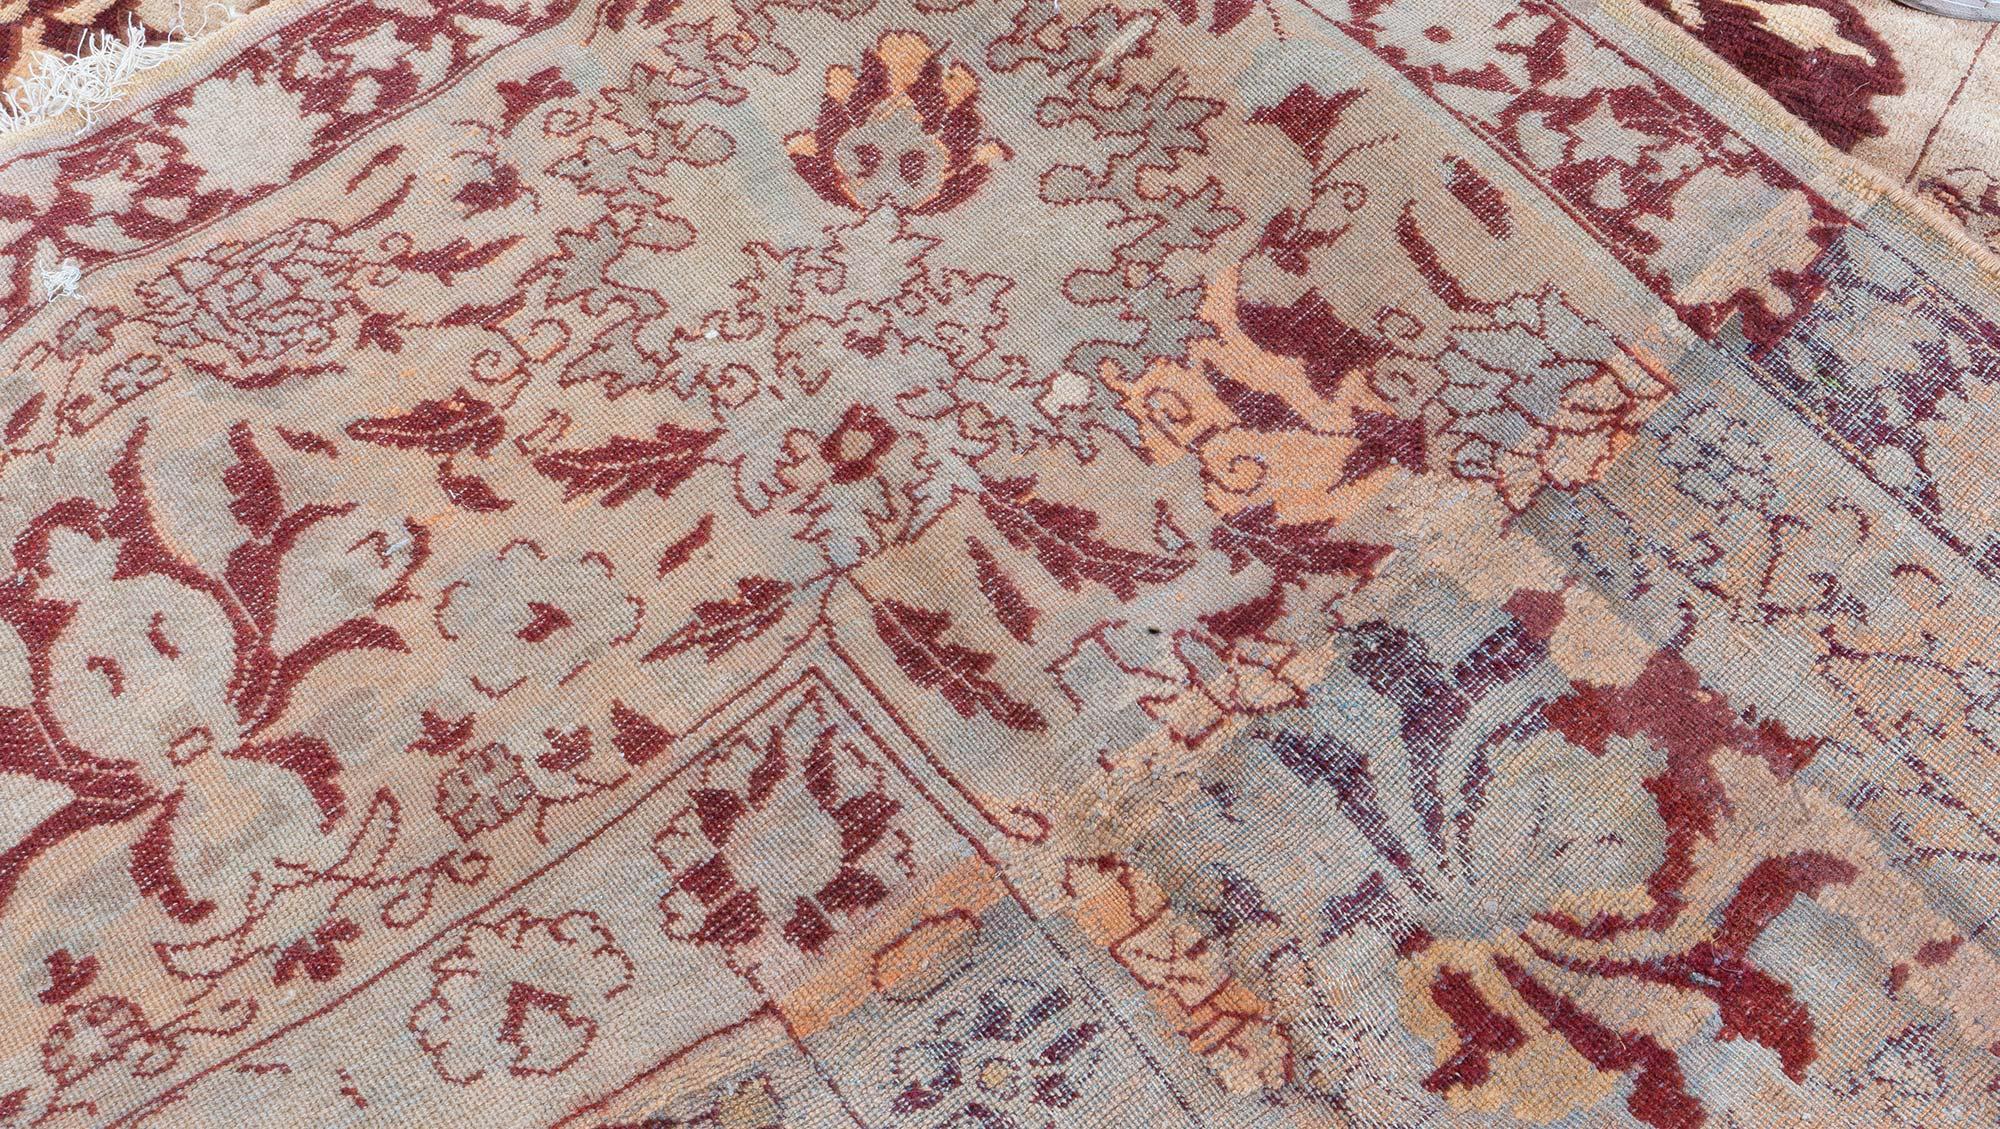 Antique Indian Amritsar Red and Beige Wool Carpet 5